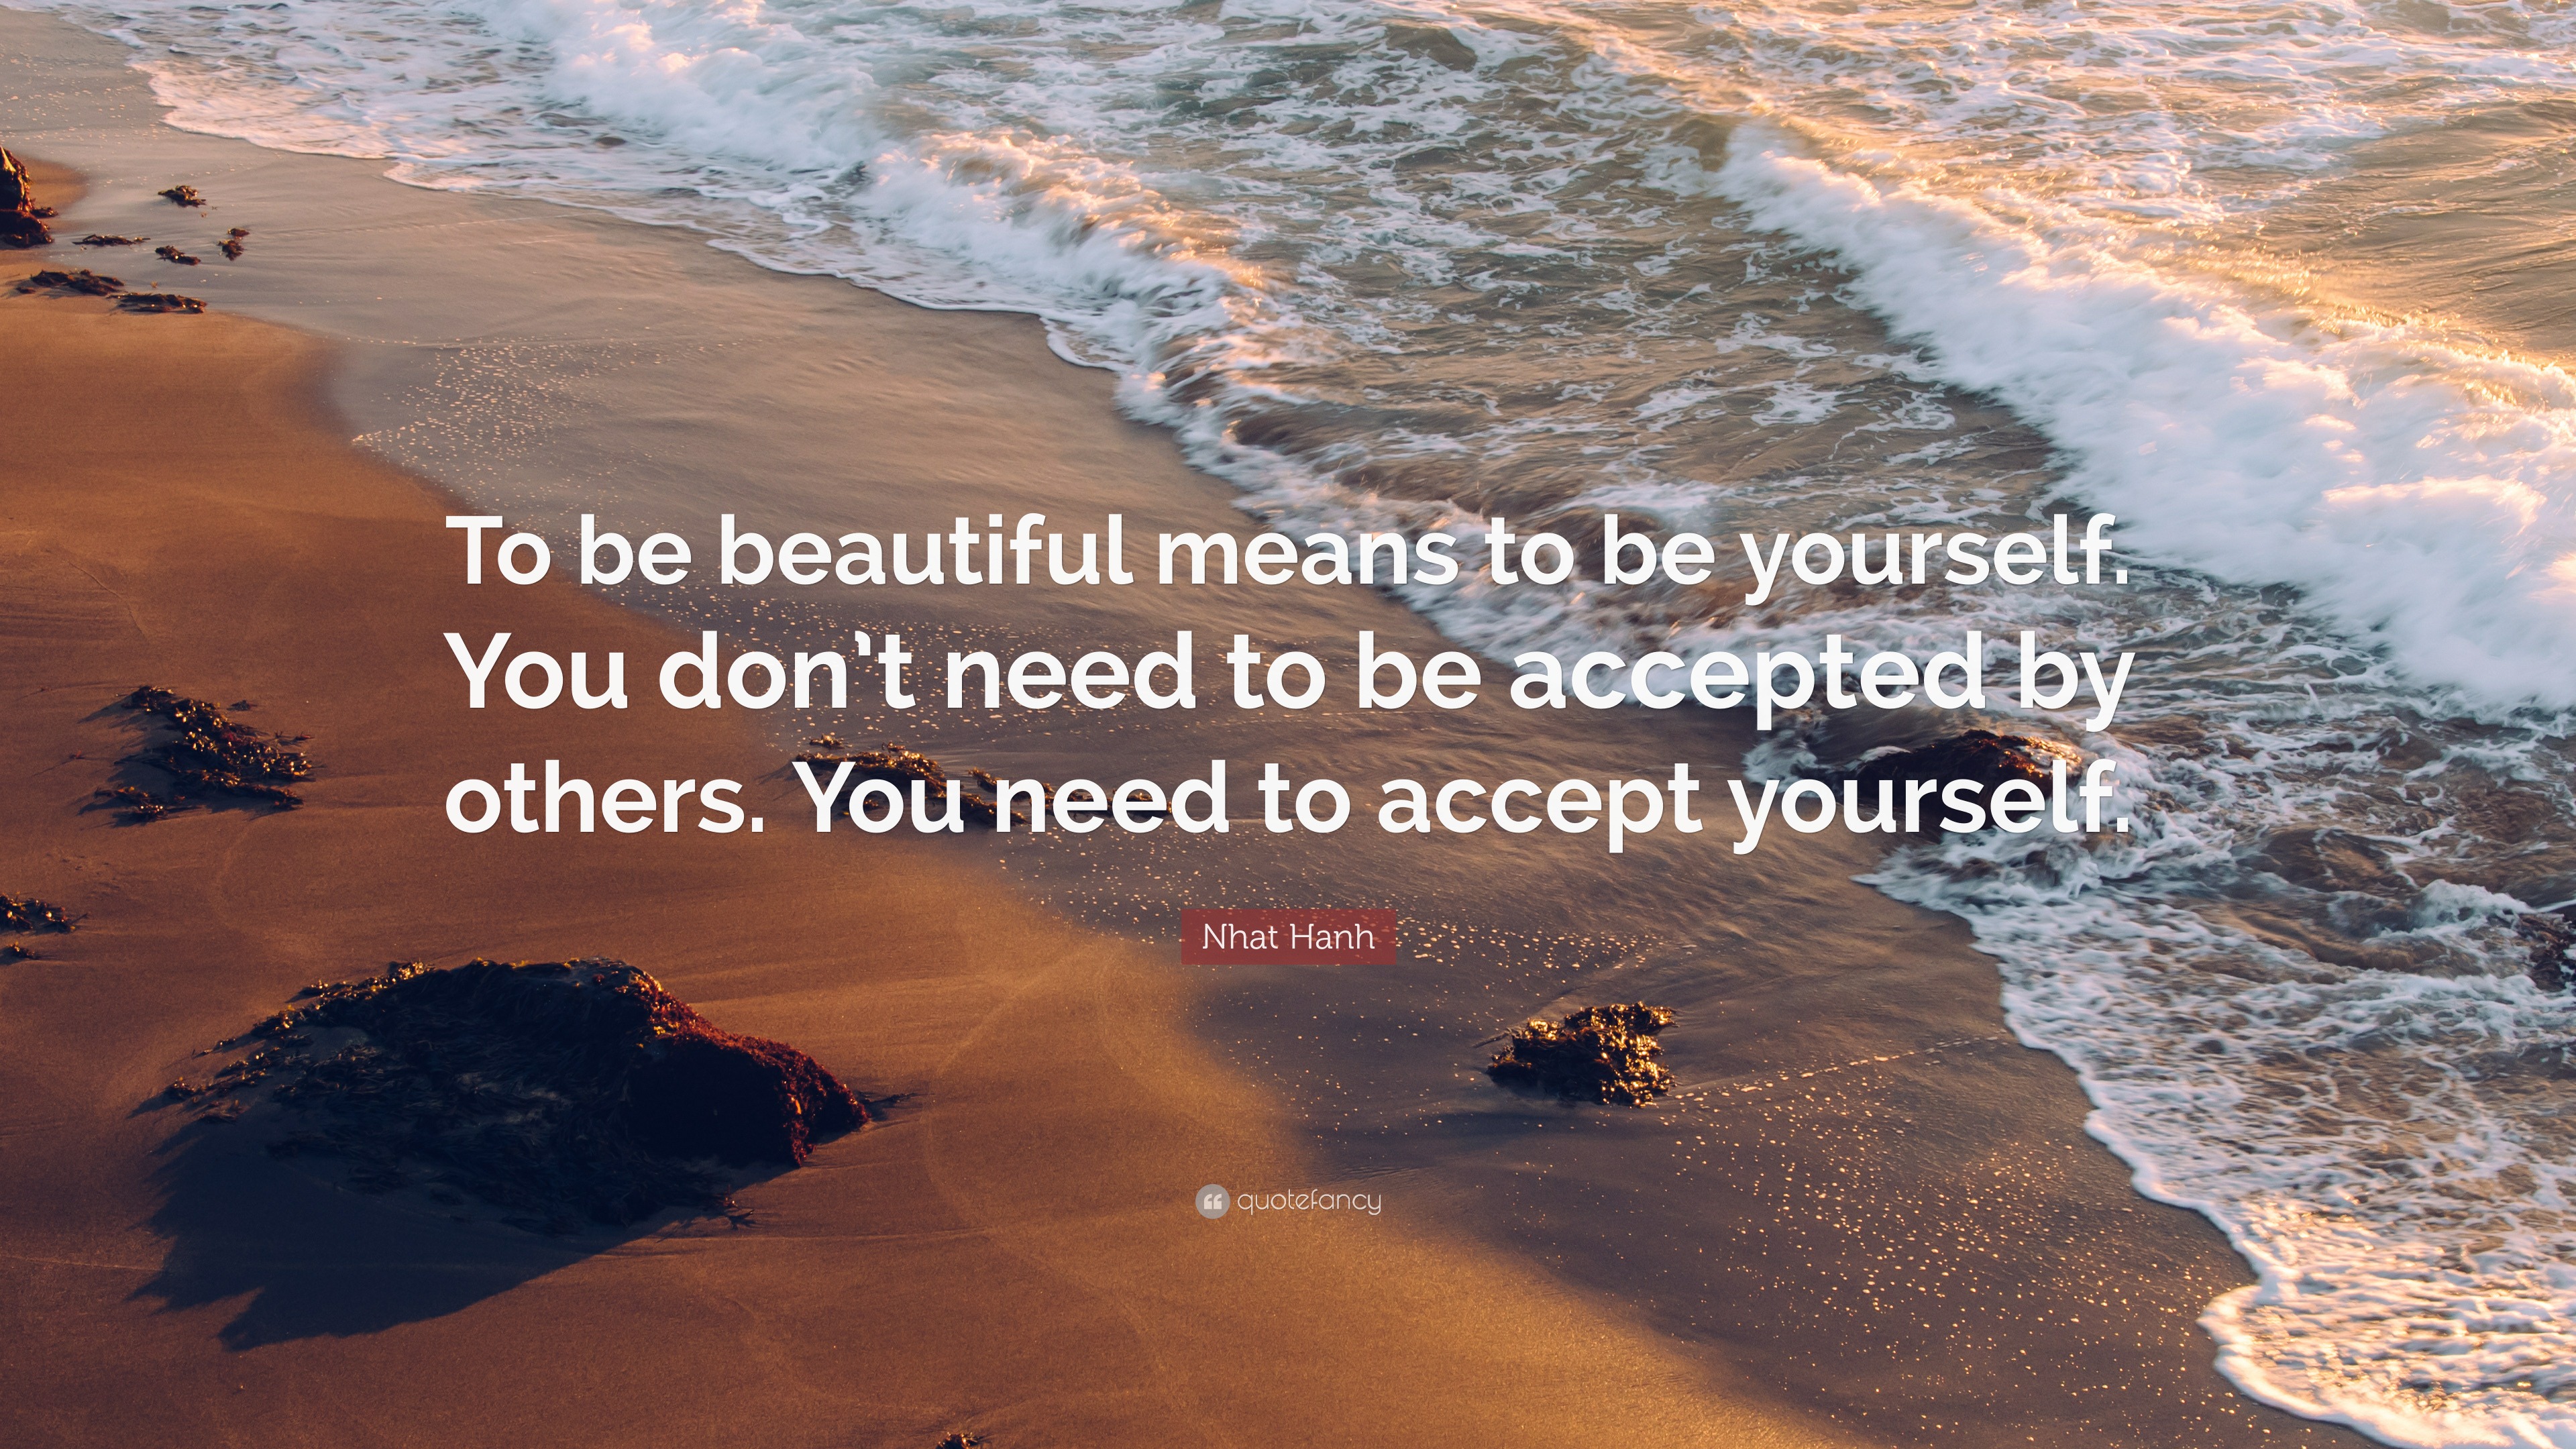 Nhat Hanh Quote “To be beautiful means to be yourself